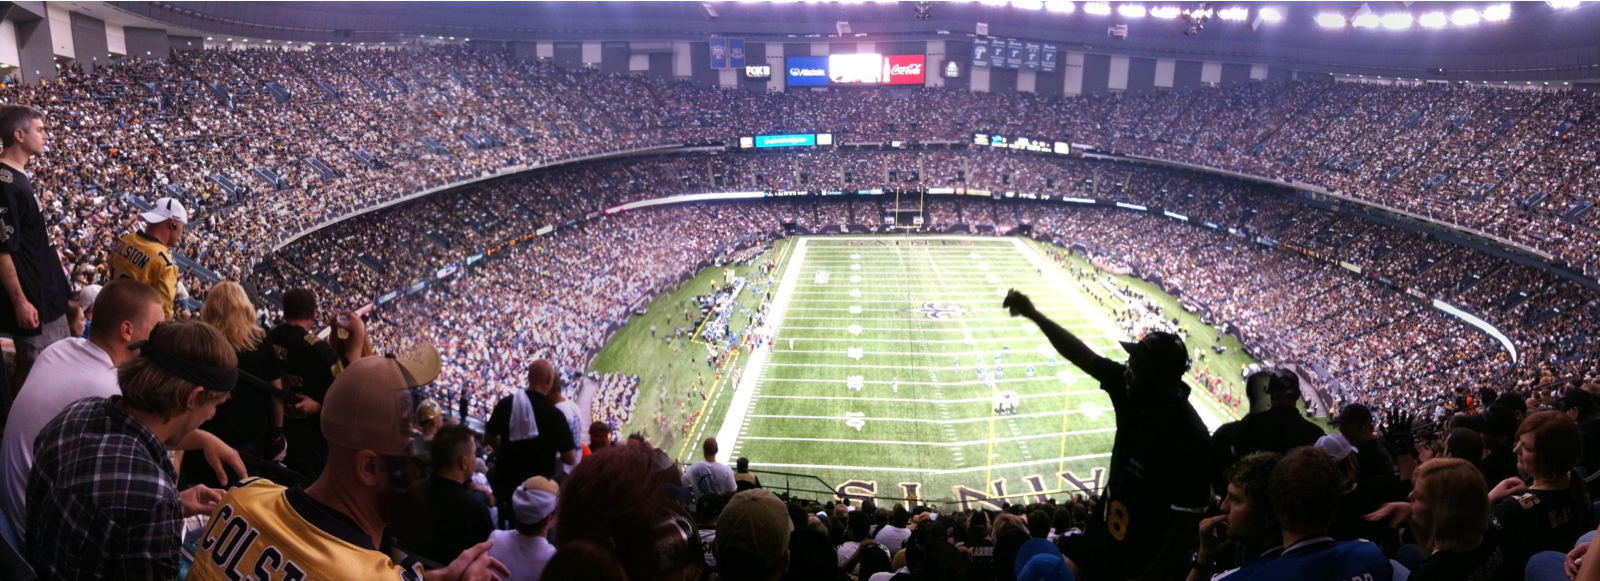 Saints game in the New Orleans Superdome